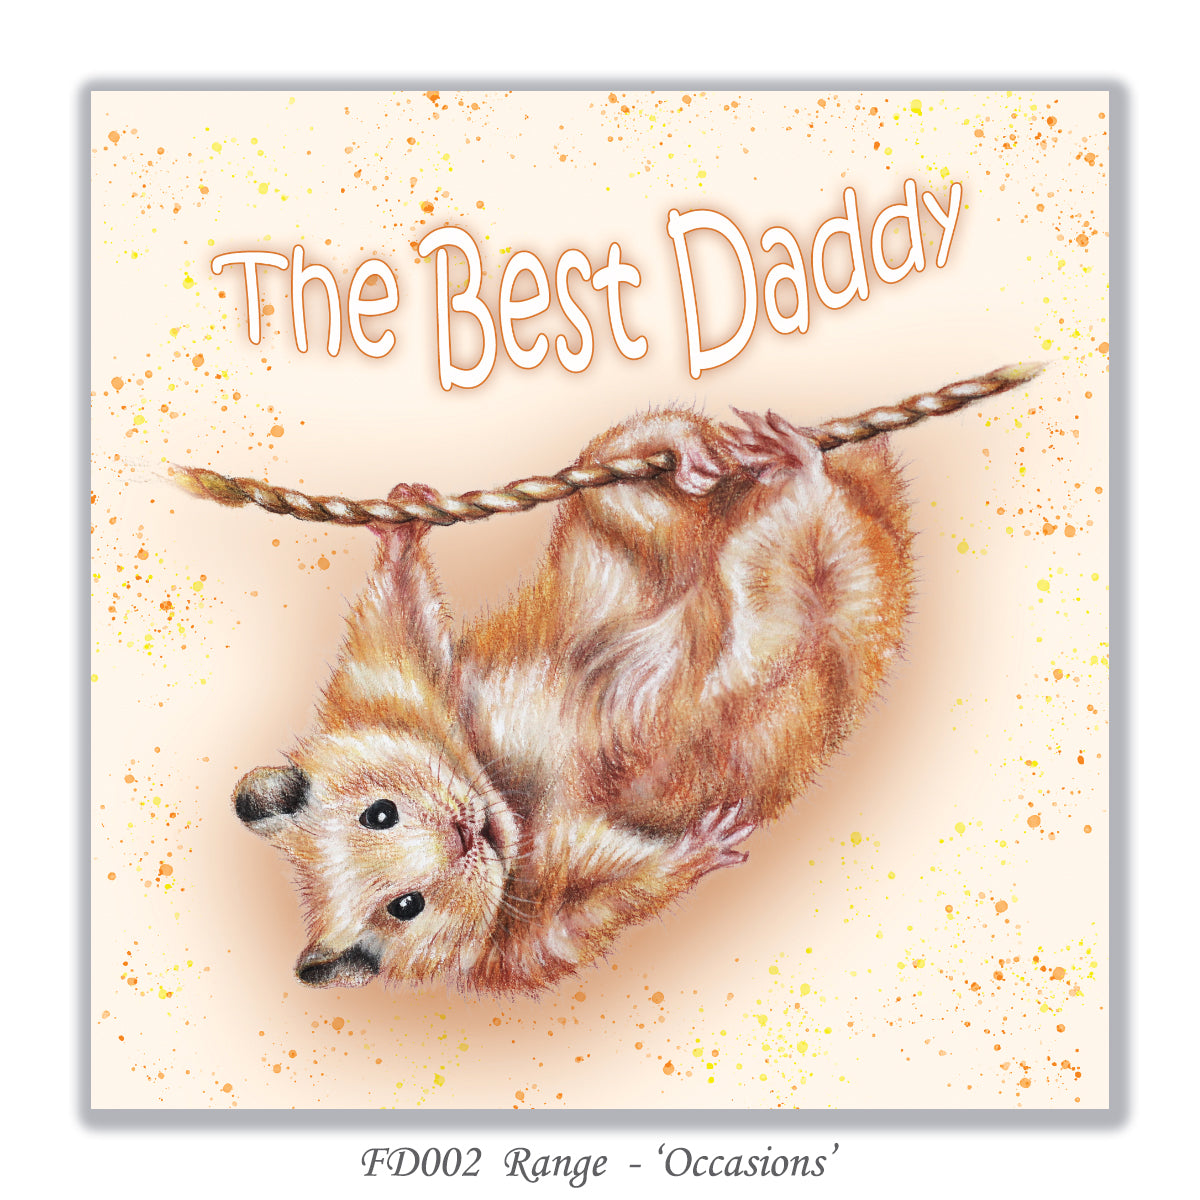 father's day greeting card